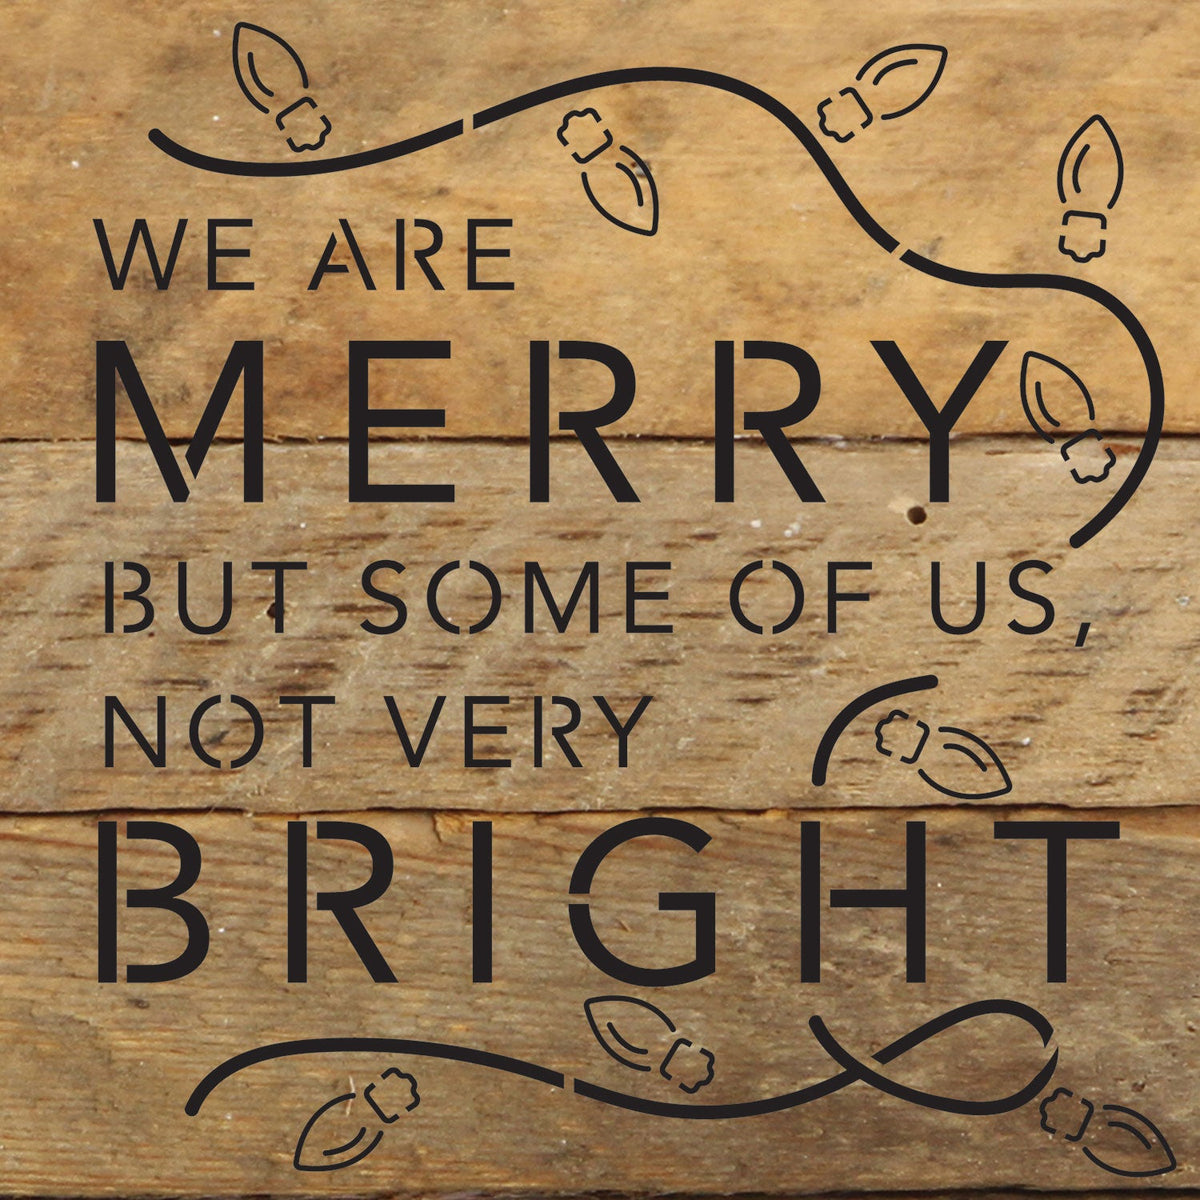 We are merry but some of us, not very bright / 6x6 Reclaimed Wood Wall Decor Sign